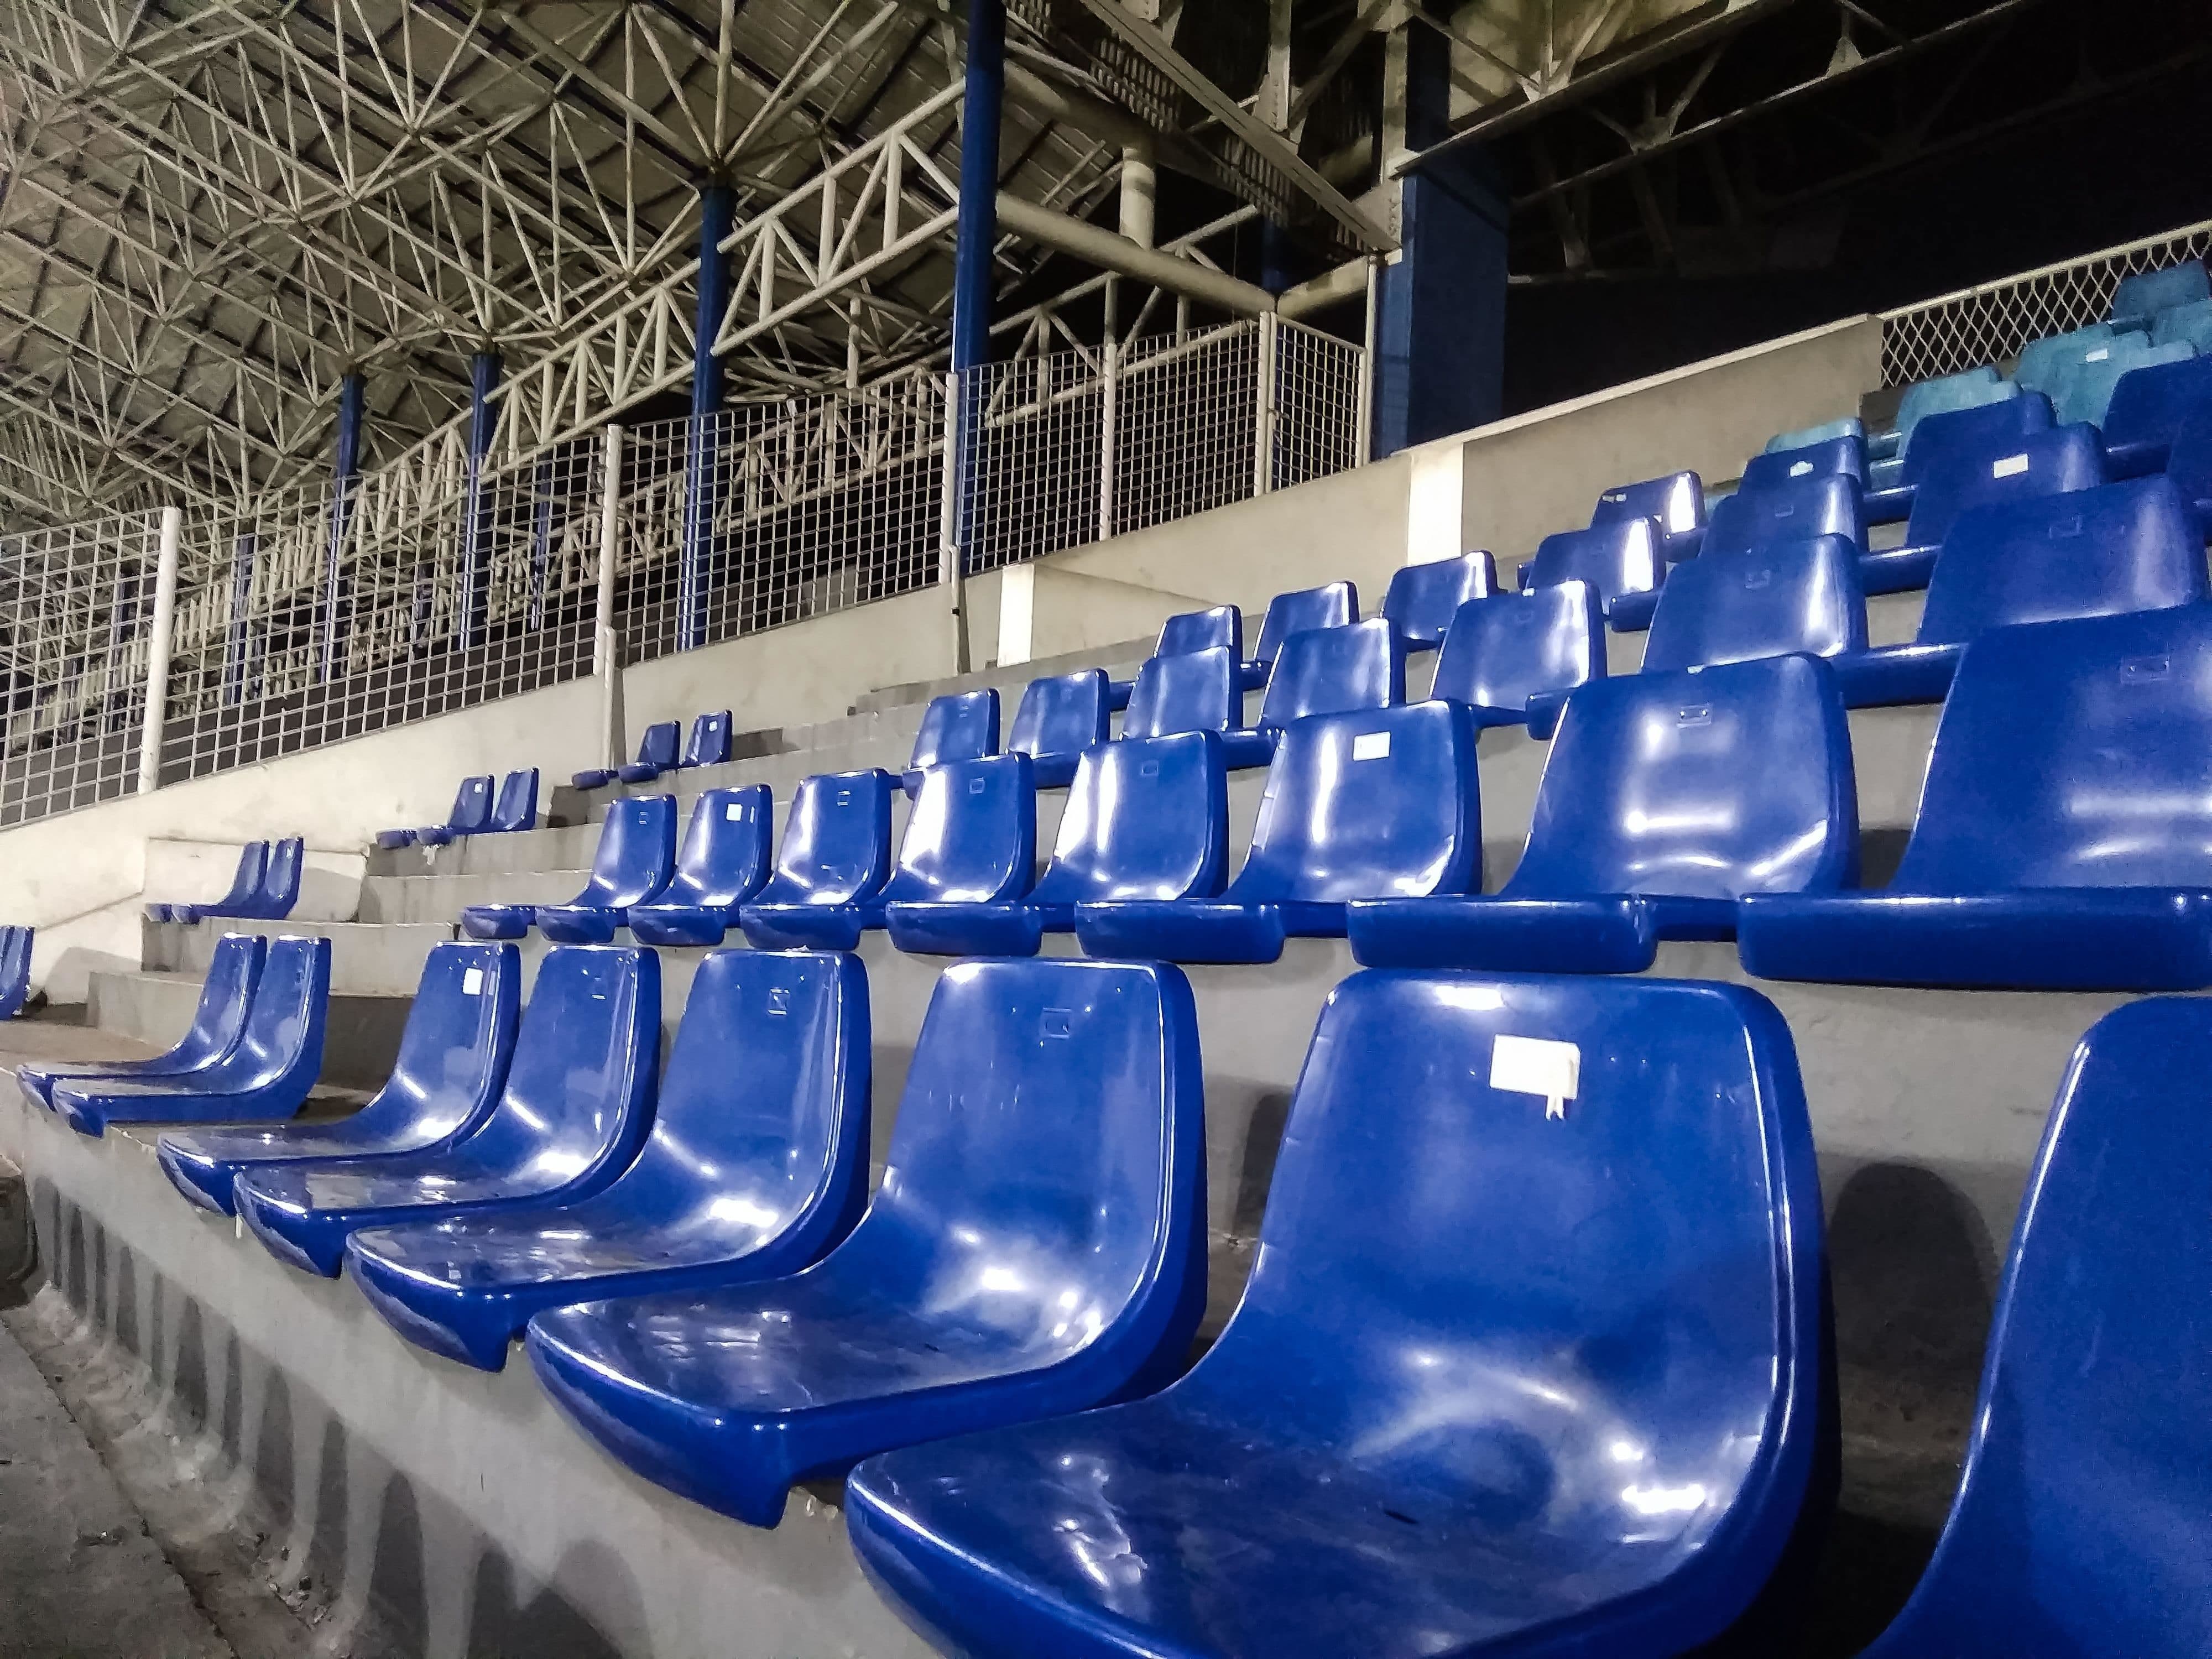 blue seating inside of entertainment venue